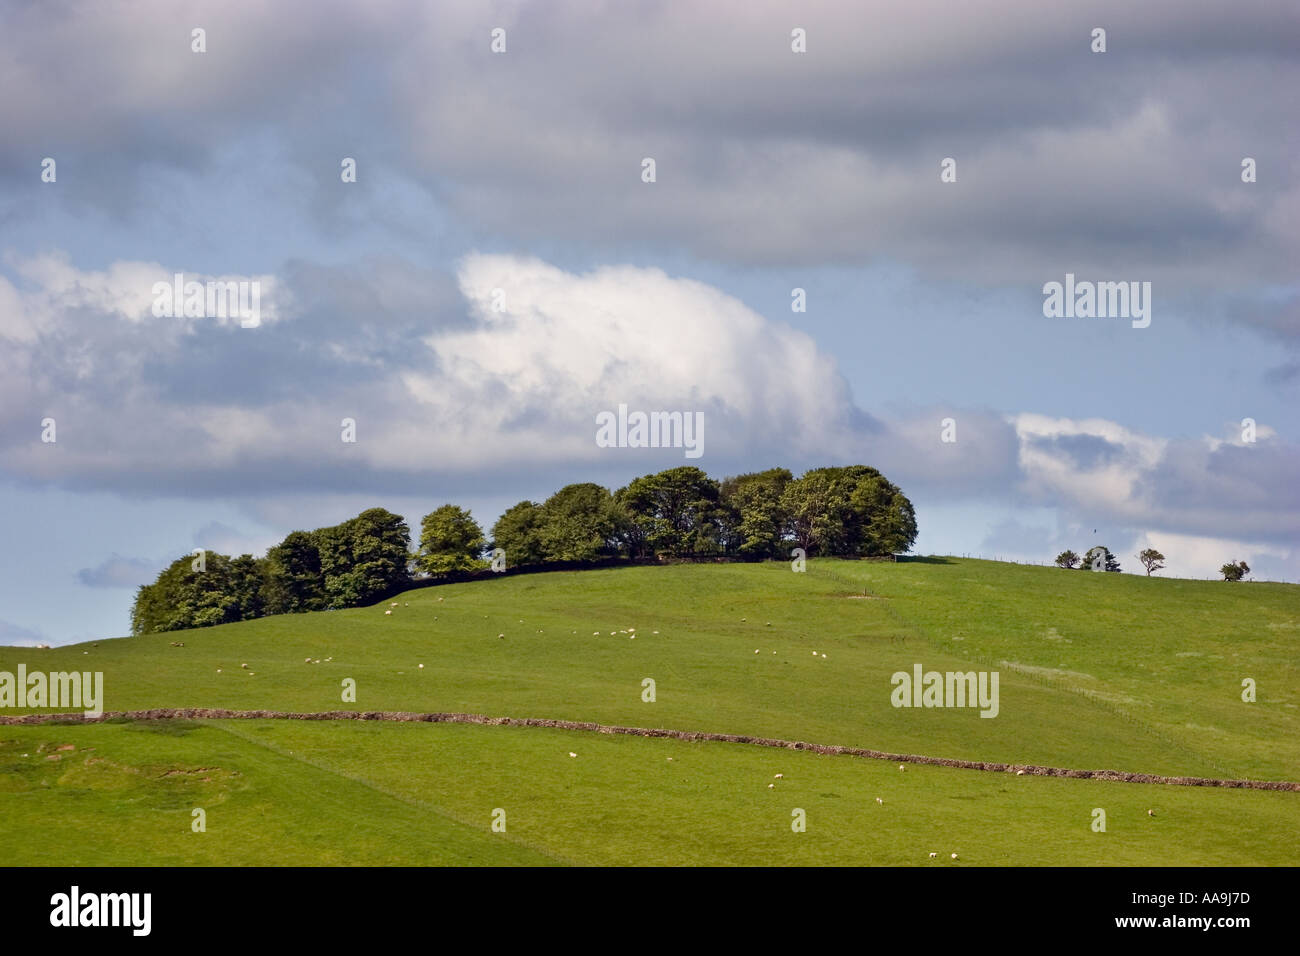 Cumbrian landscape with trees sheep and dry stone wall Stock Photo